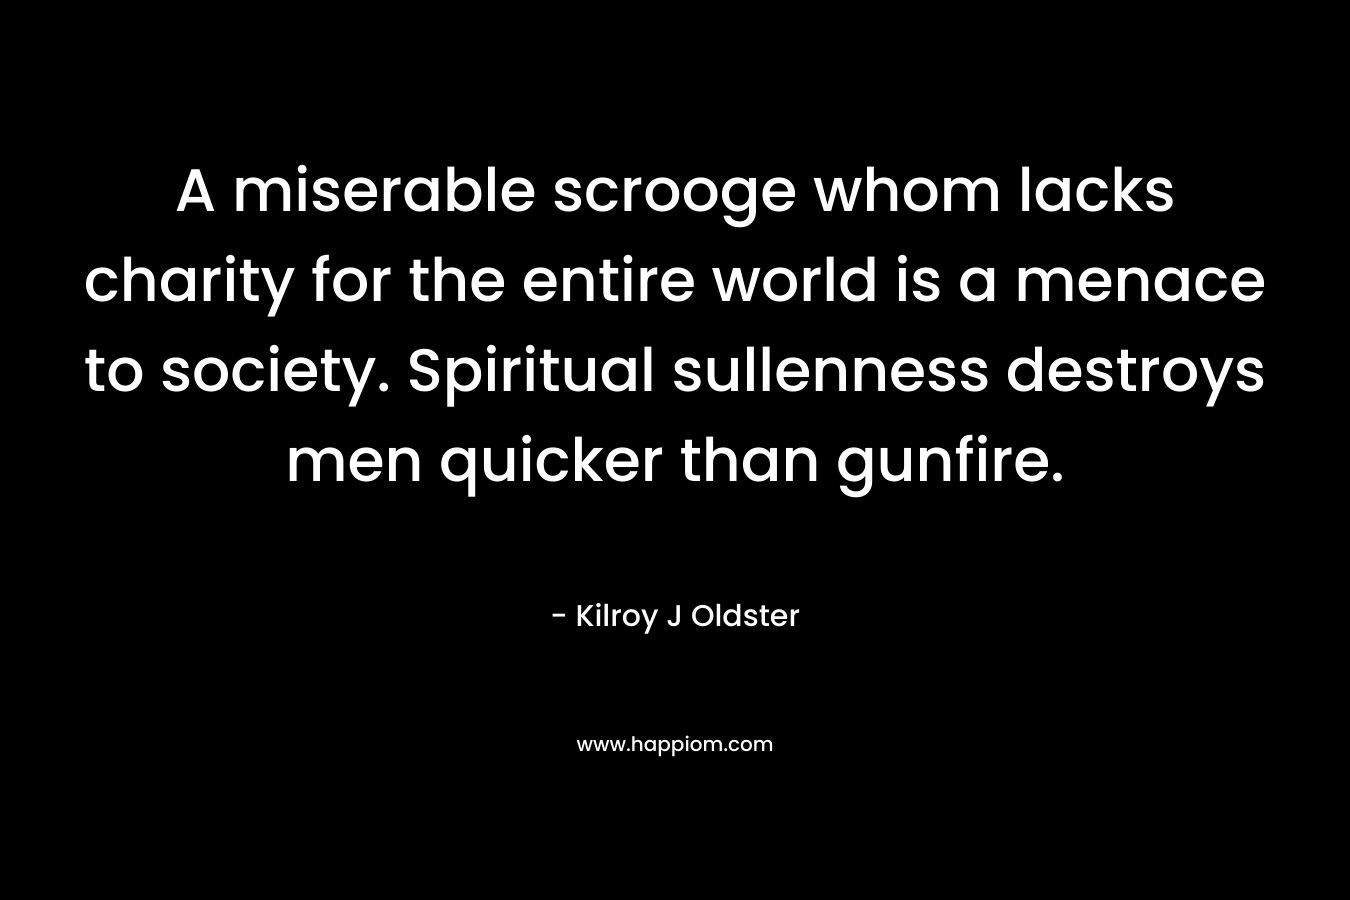 A miserable scrooge whom lacks charity for the entire world is a menace to society. Spiritual sullenness destroys men quicker than gunfire. – Kilroy J Oldster